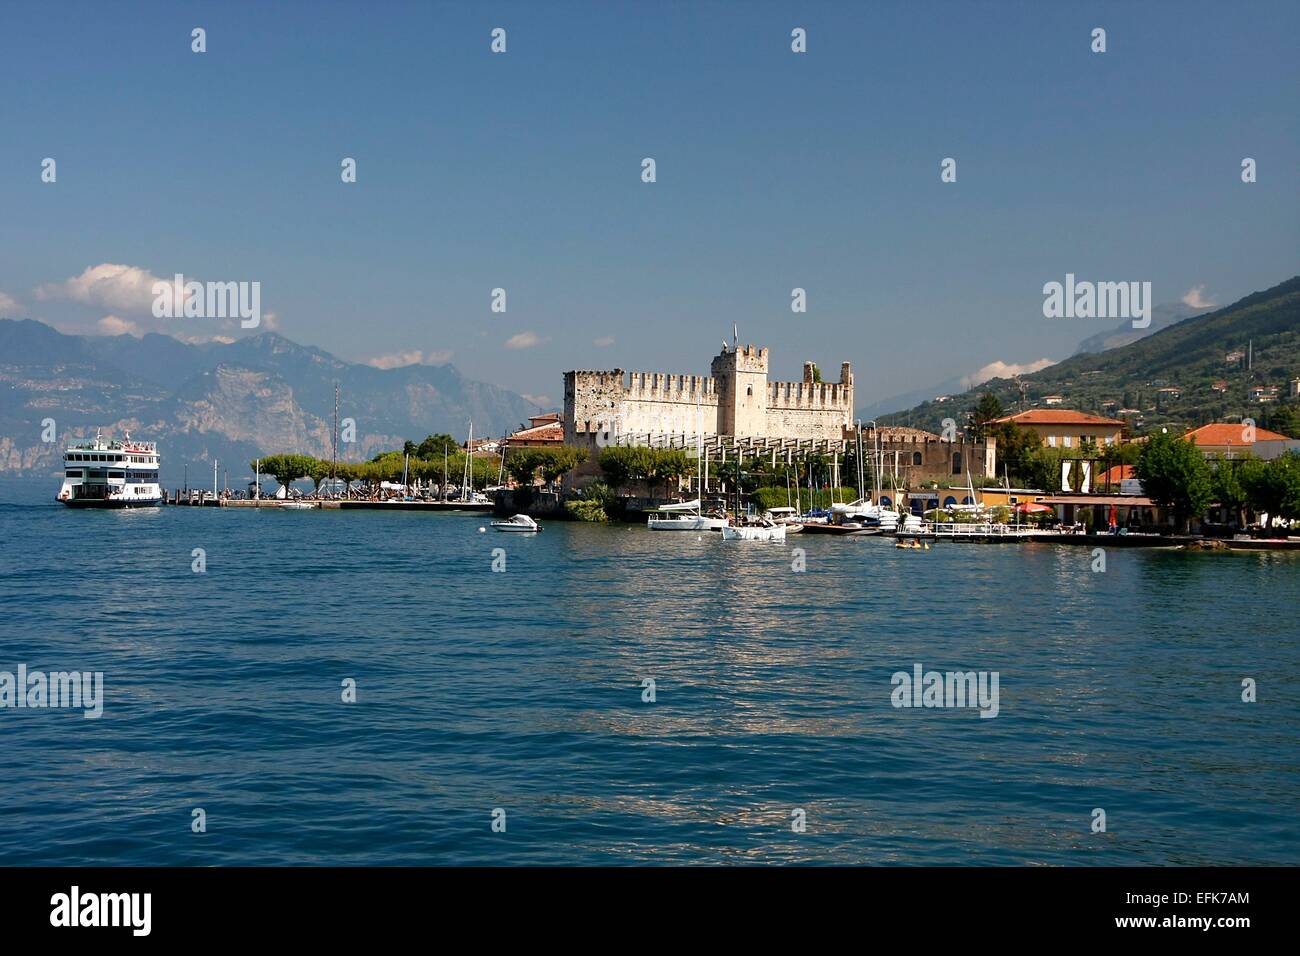 Torri del Benaco is a town on the eastern shore of Lake Garda. It lies on the Gardesana Orientale. In the village there is a Scaliger Castle, which was built in 1383 to protect the harbor. Photo: Klaus Nowottnick Date: August 27, 2014 Stock Photo